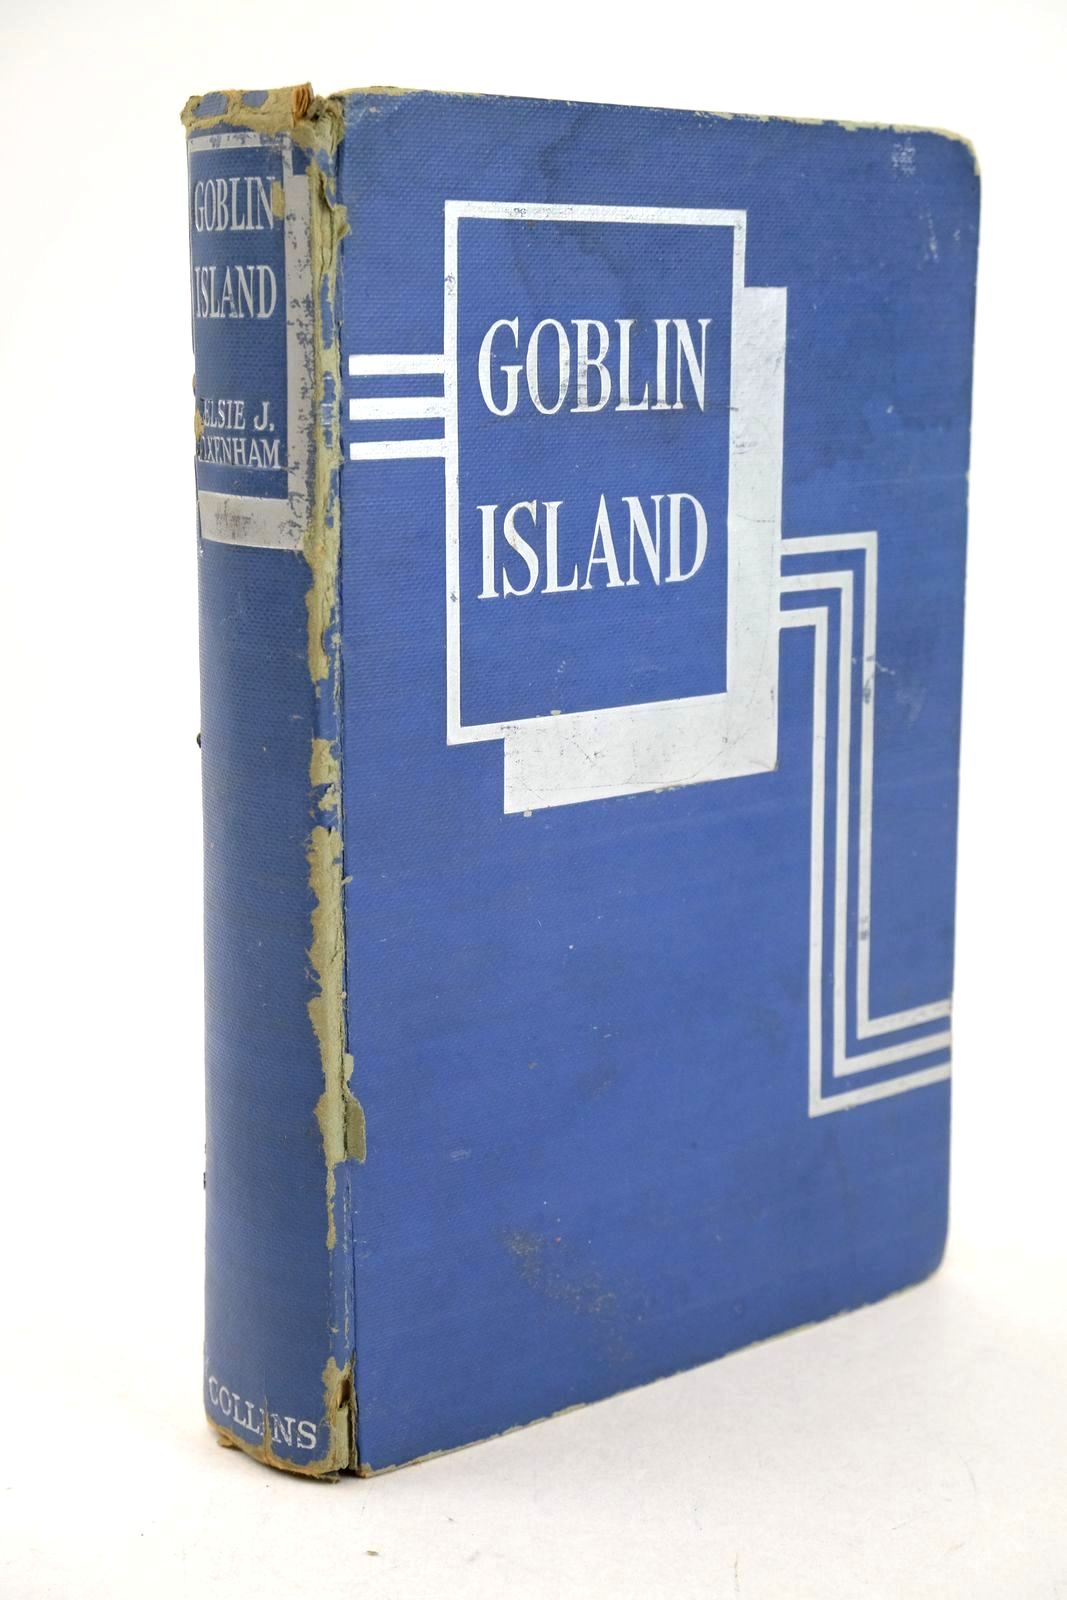 Photo of GOBLIN ISLAND written by Oxenham, Elsie J. published by Collins (STOCK CODE: 1326859)  for sale by Stella & Rose's Books